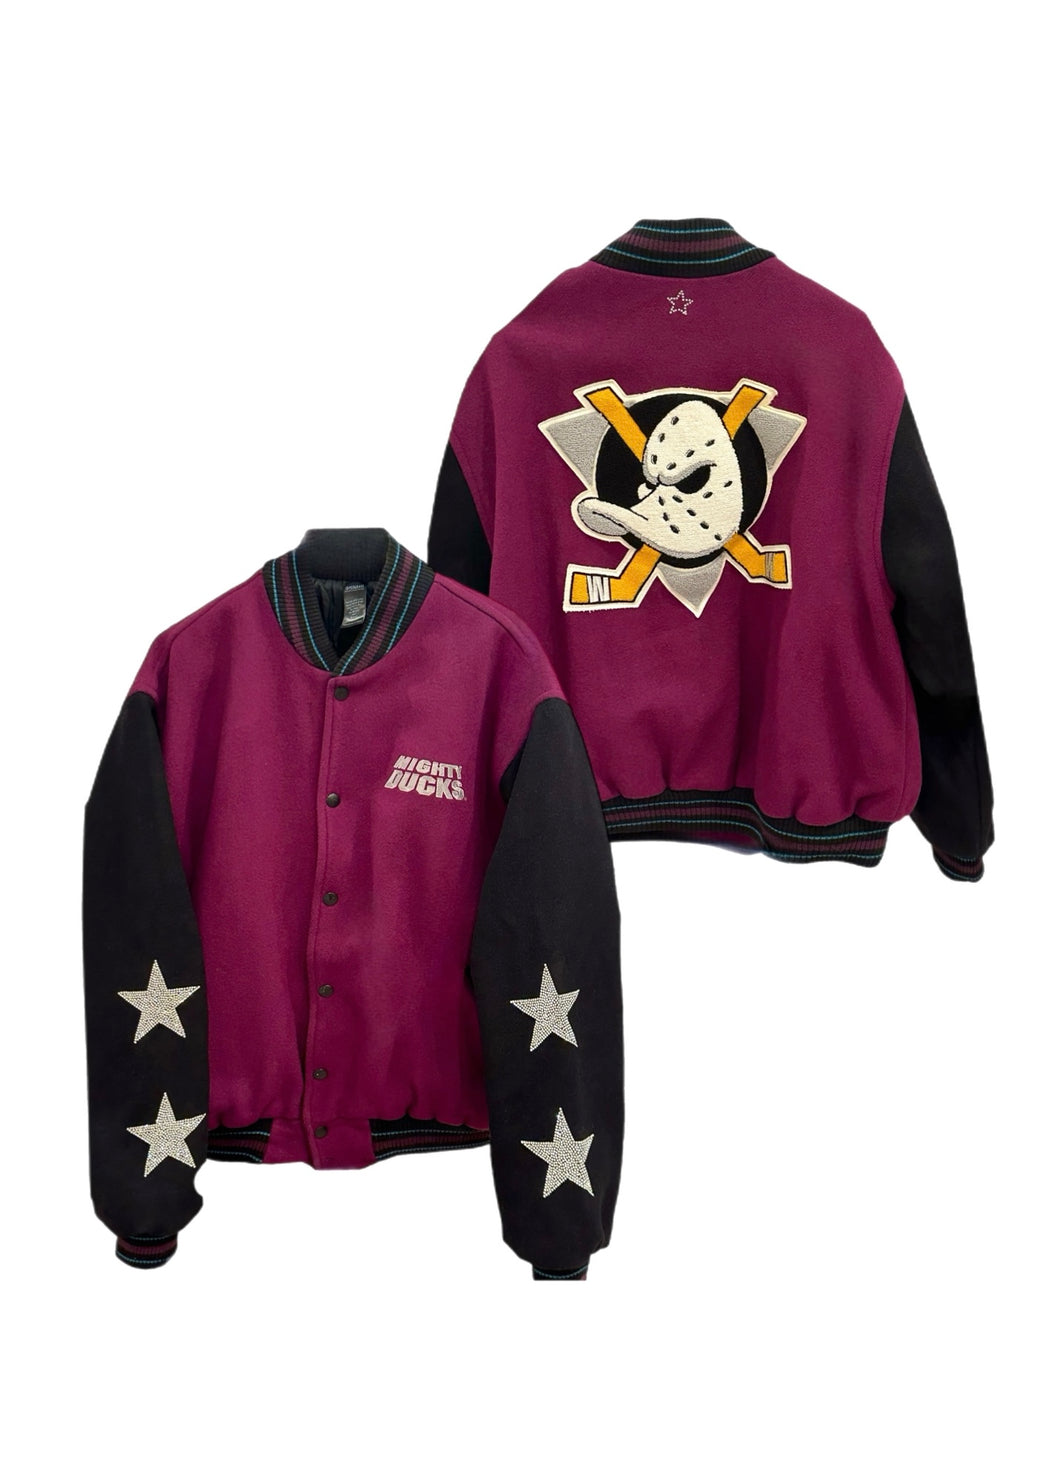 Anaheim Ducks, Hockey One of a Kind Vintage “Mighty Duck” Rare Find Letterman Varsity Jacket with Crystal Star Design